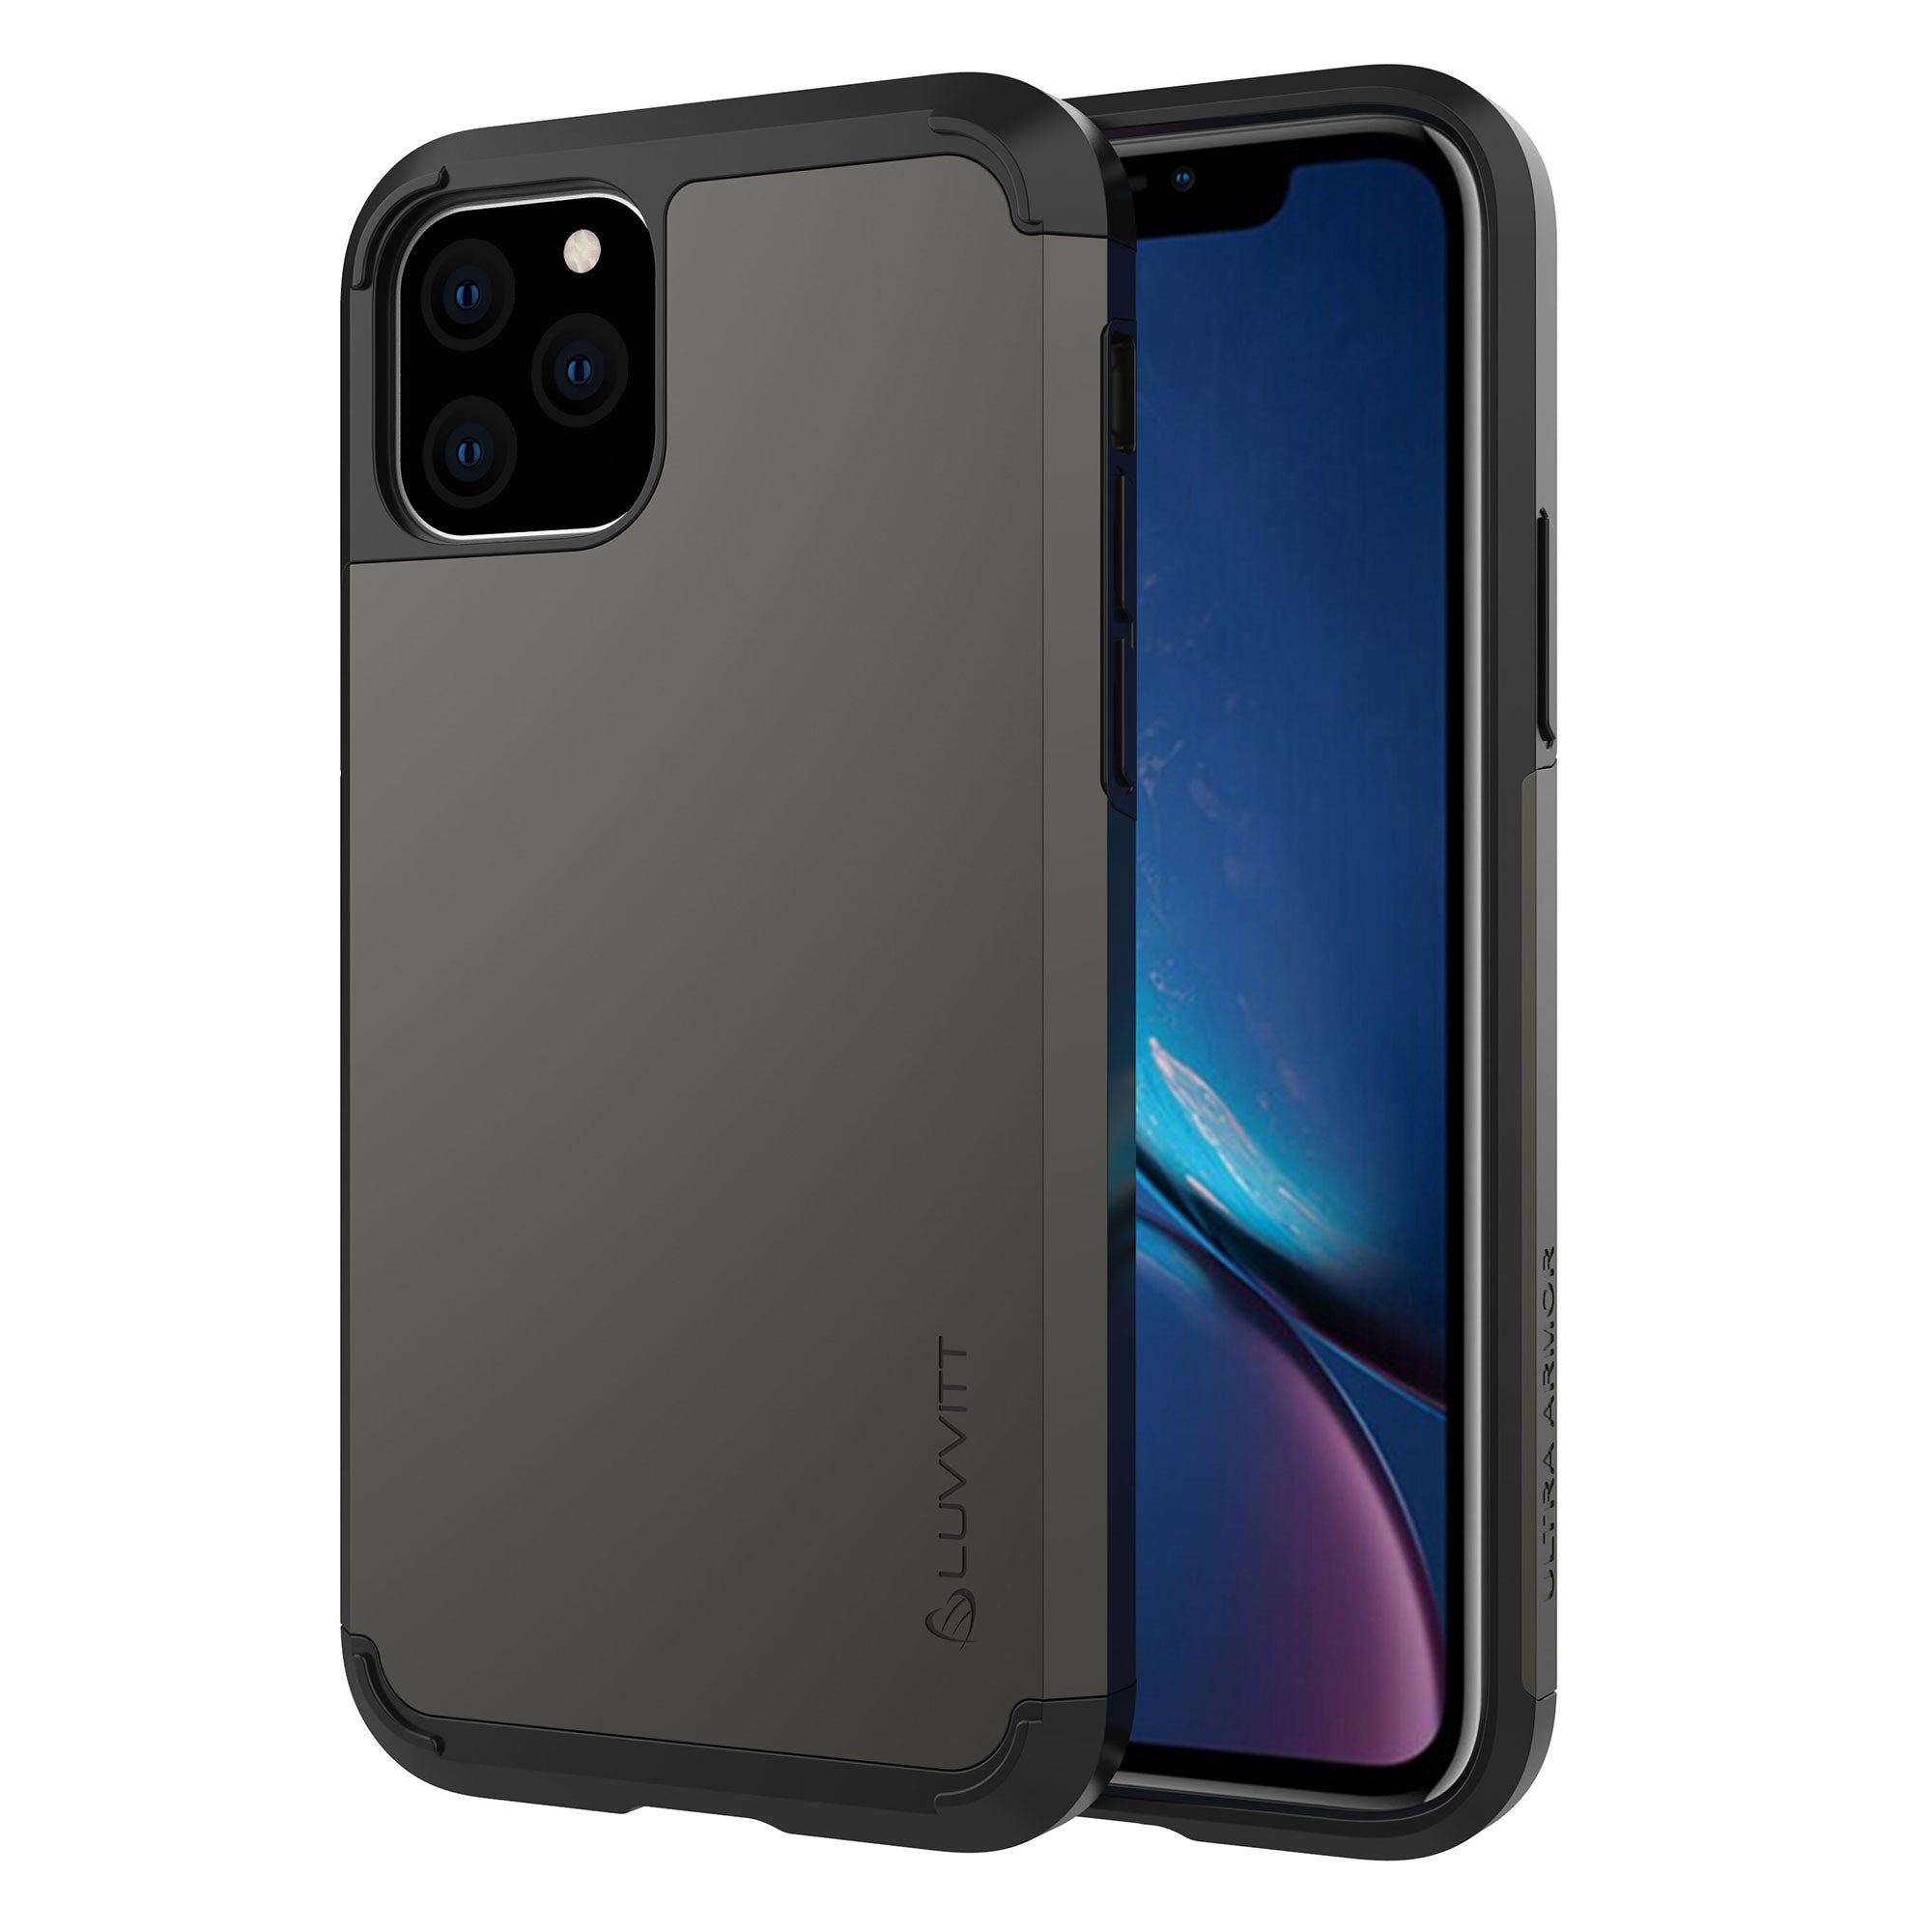 Luvvitt Ultra Armor Dual Layer Heavy Duty Case for iPhone 11 Pro Max 2019 - Space Gray